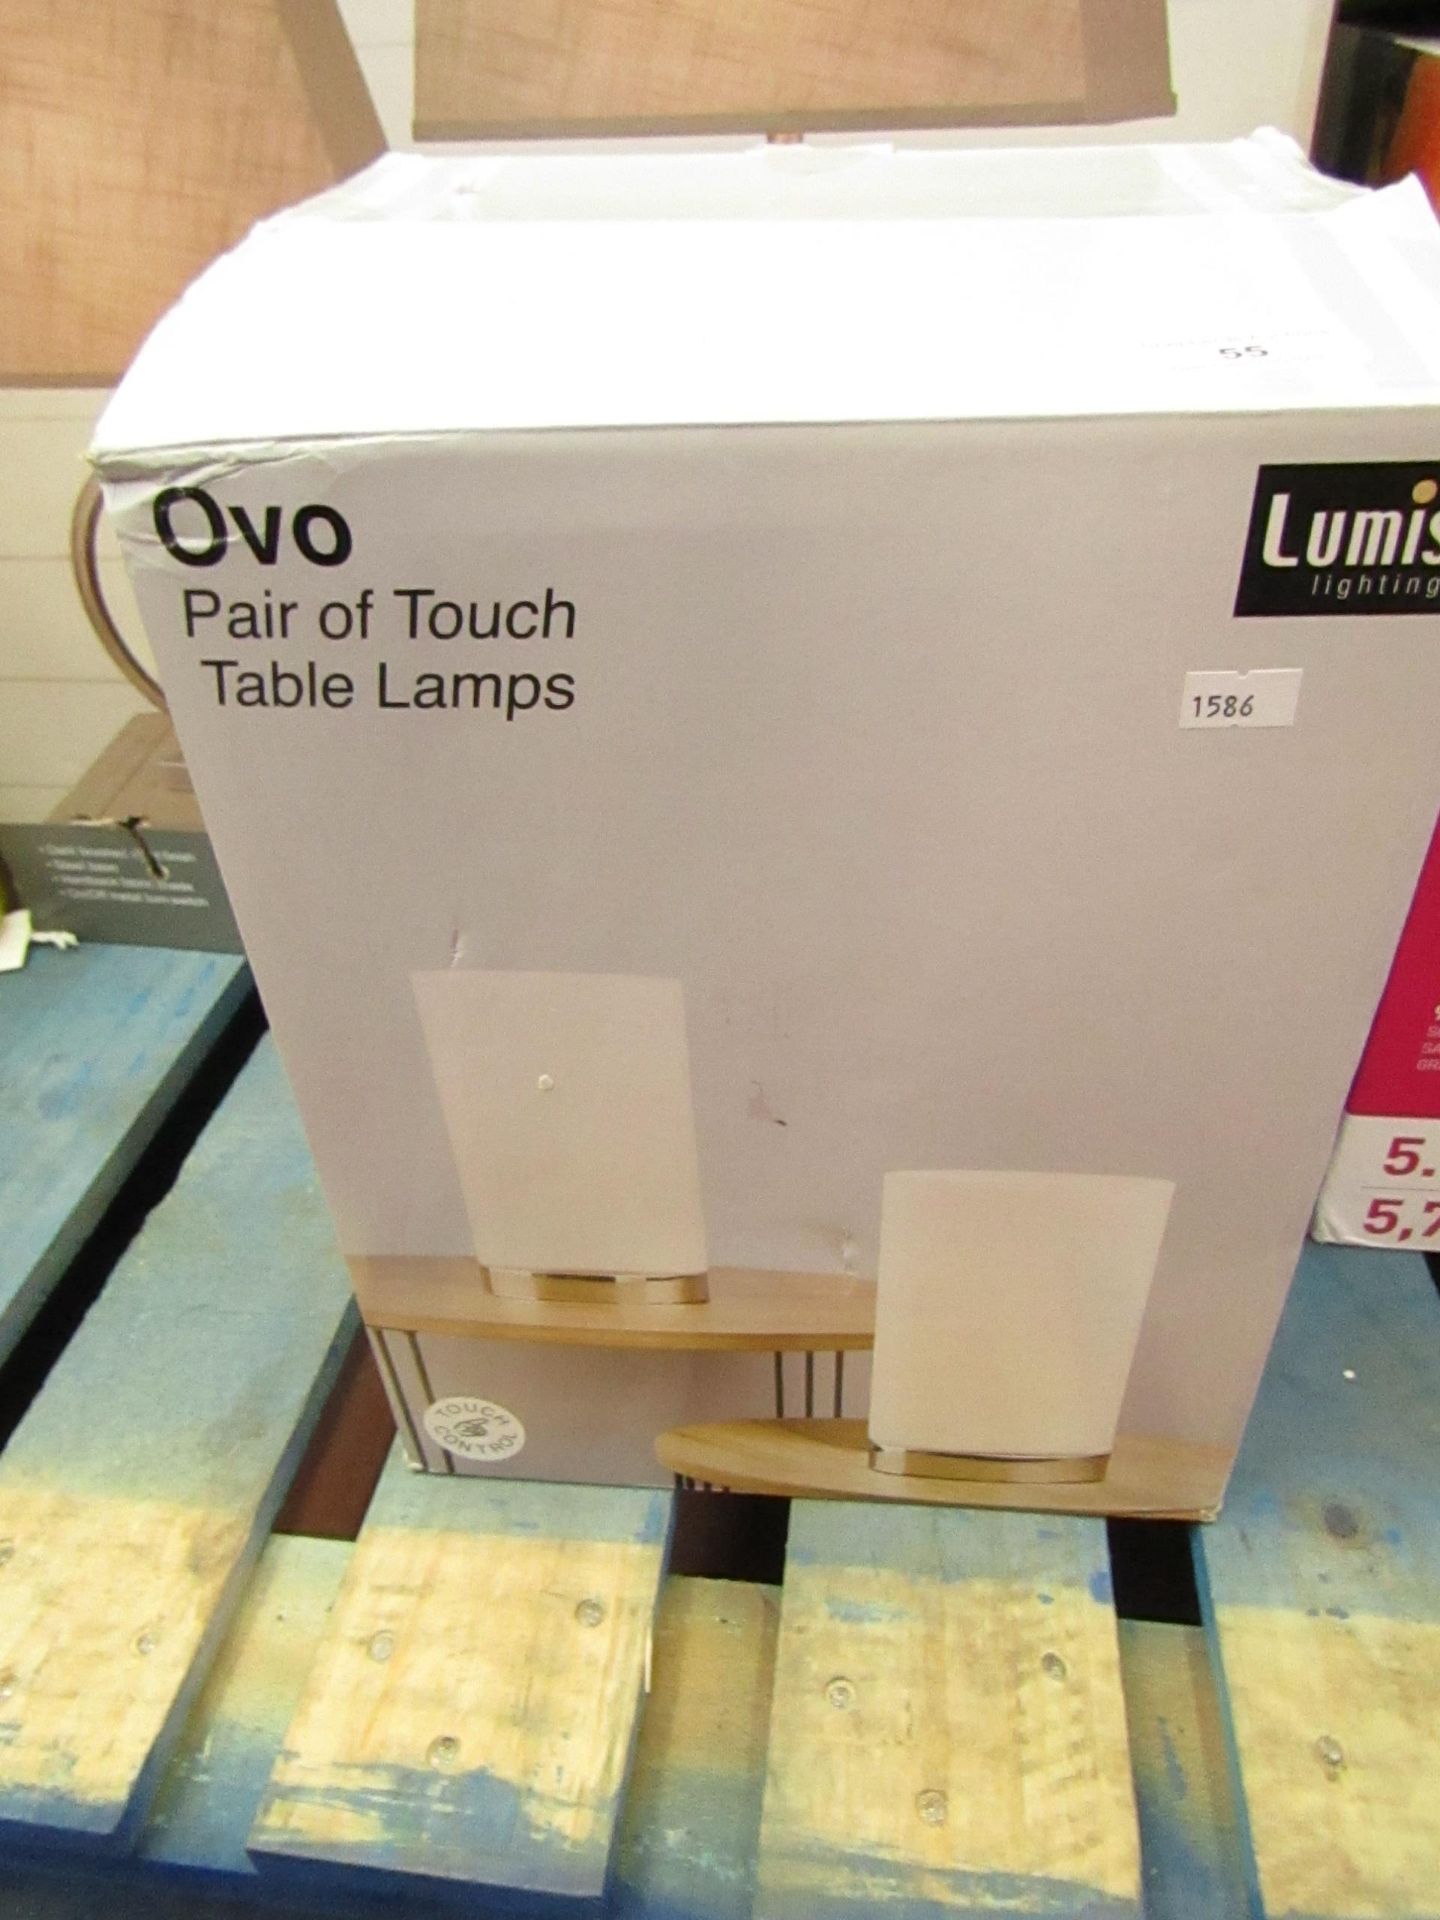 Lumis - Pair of Touch Table Lamps - Untested and Boxed.